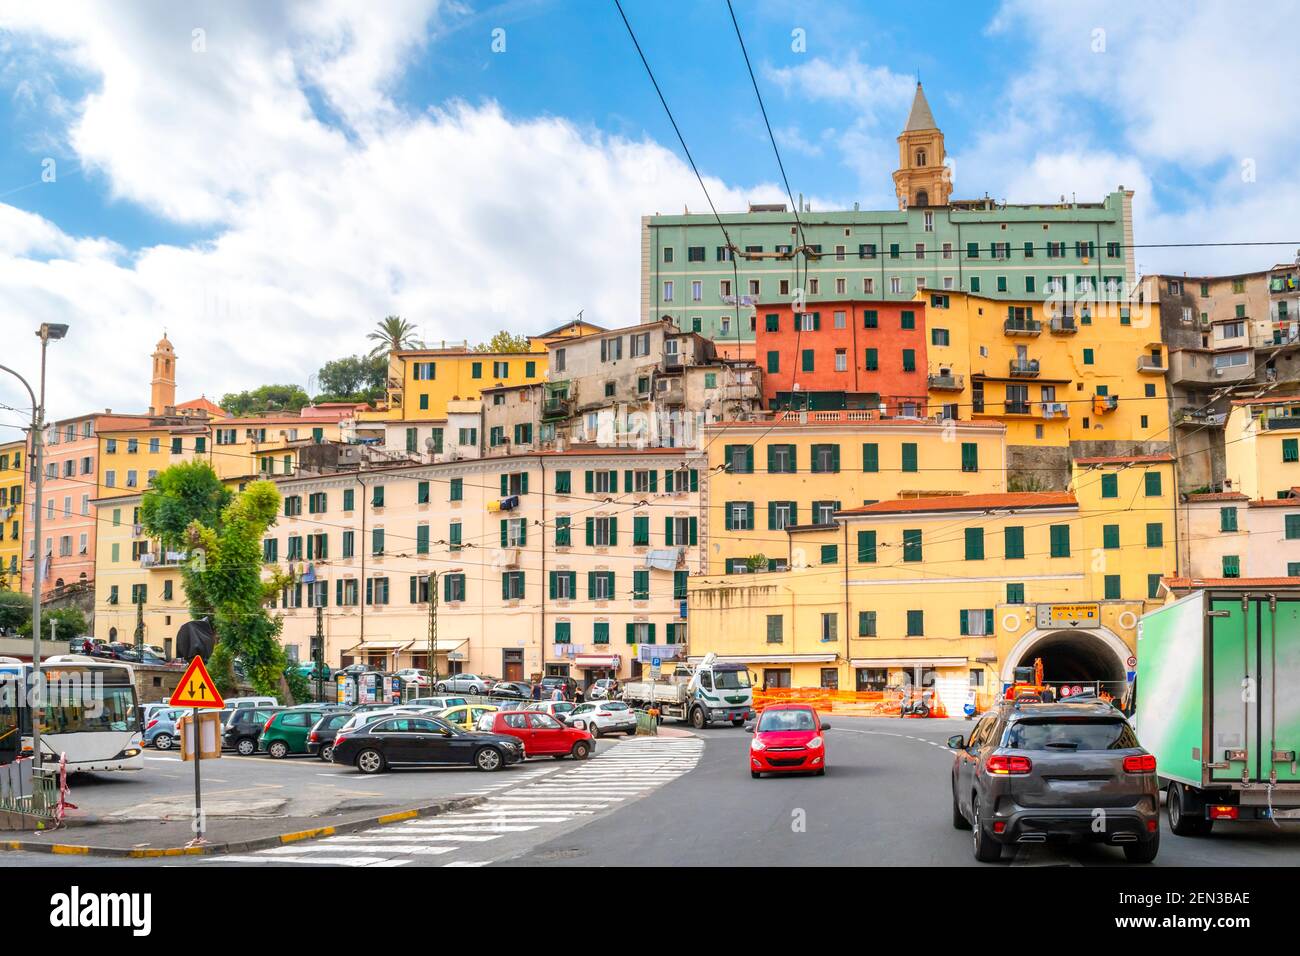 The town center of Ventimiglia, Italy on the Italian Riviera, with the colorful hillside homes and cathedral above. Stock Photo